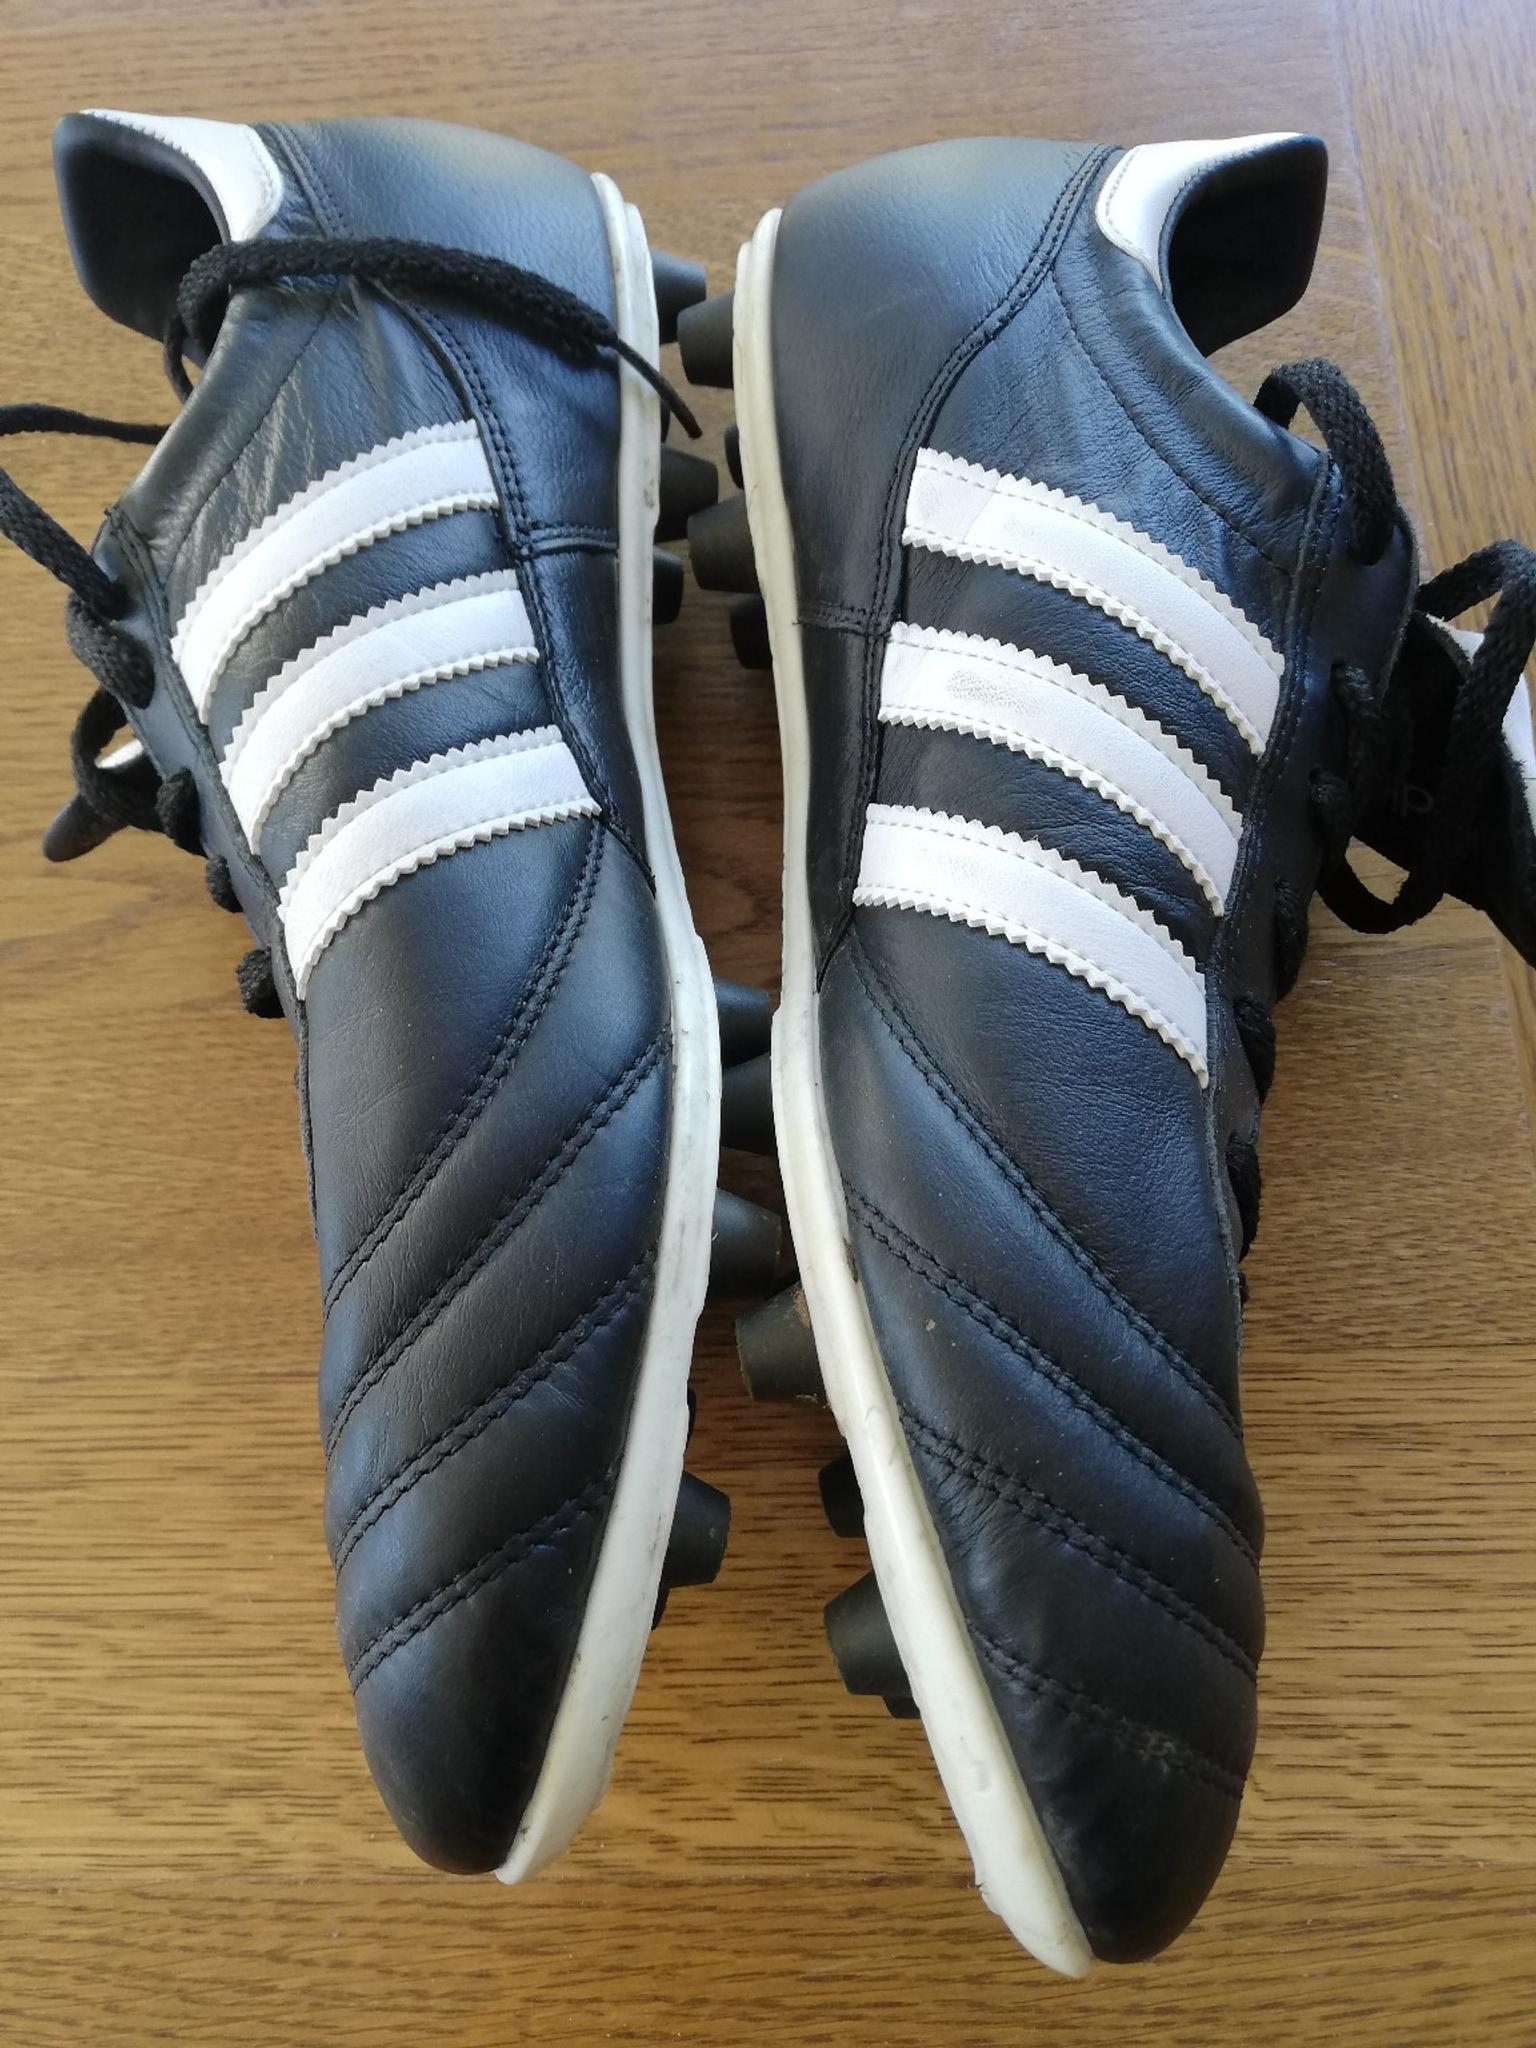 Adidas Copa Mundial Size 9 5 In L40 Chorley For 40 00 For Sale